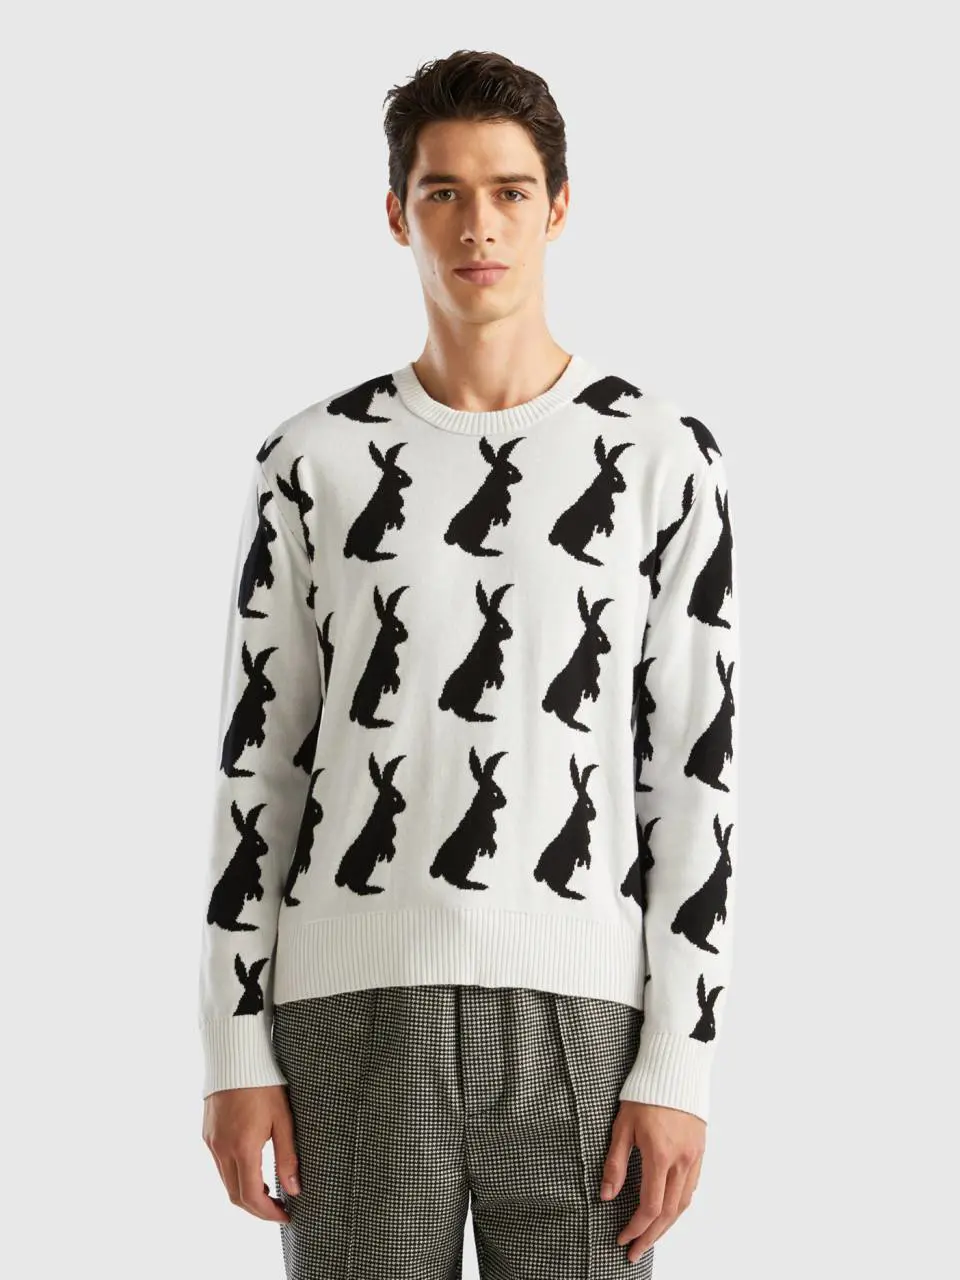 Benetton sweater with bunny pattern. 1